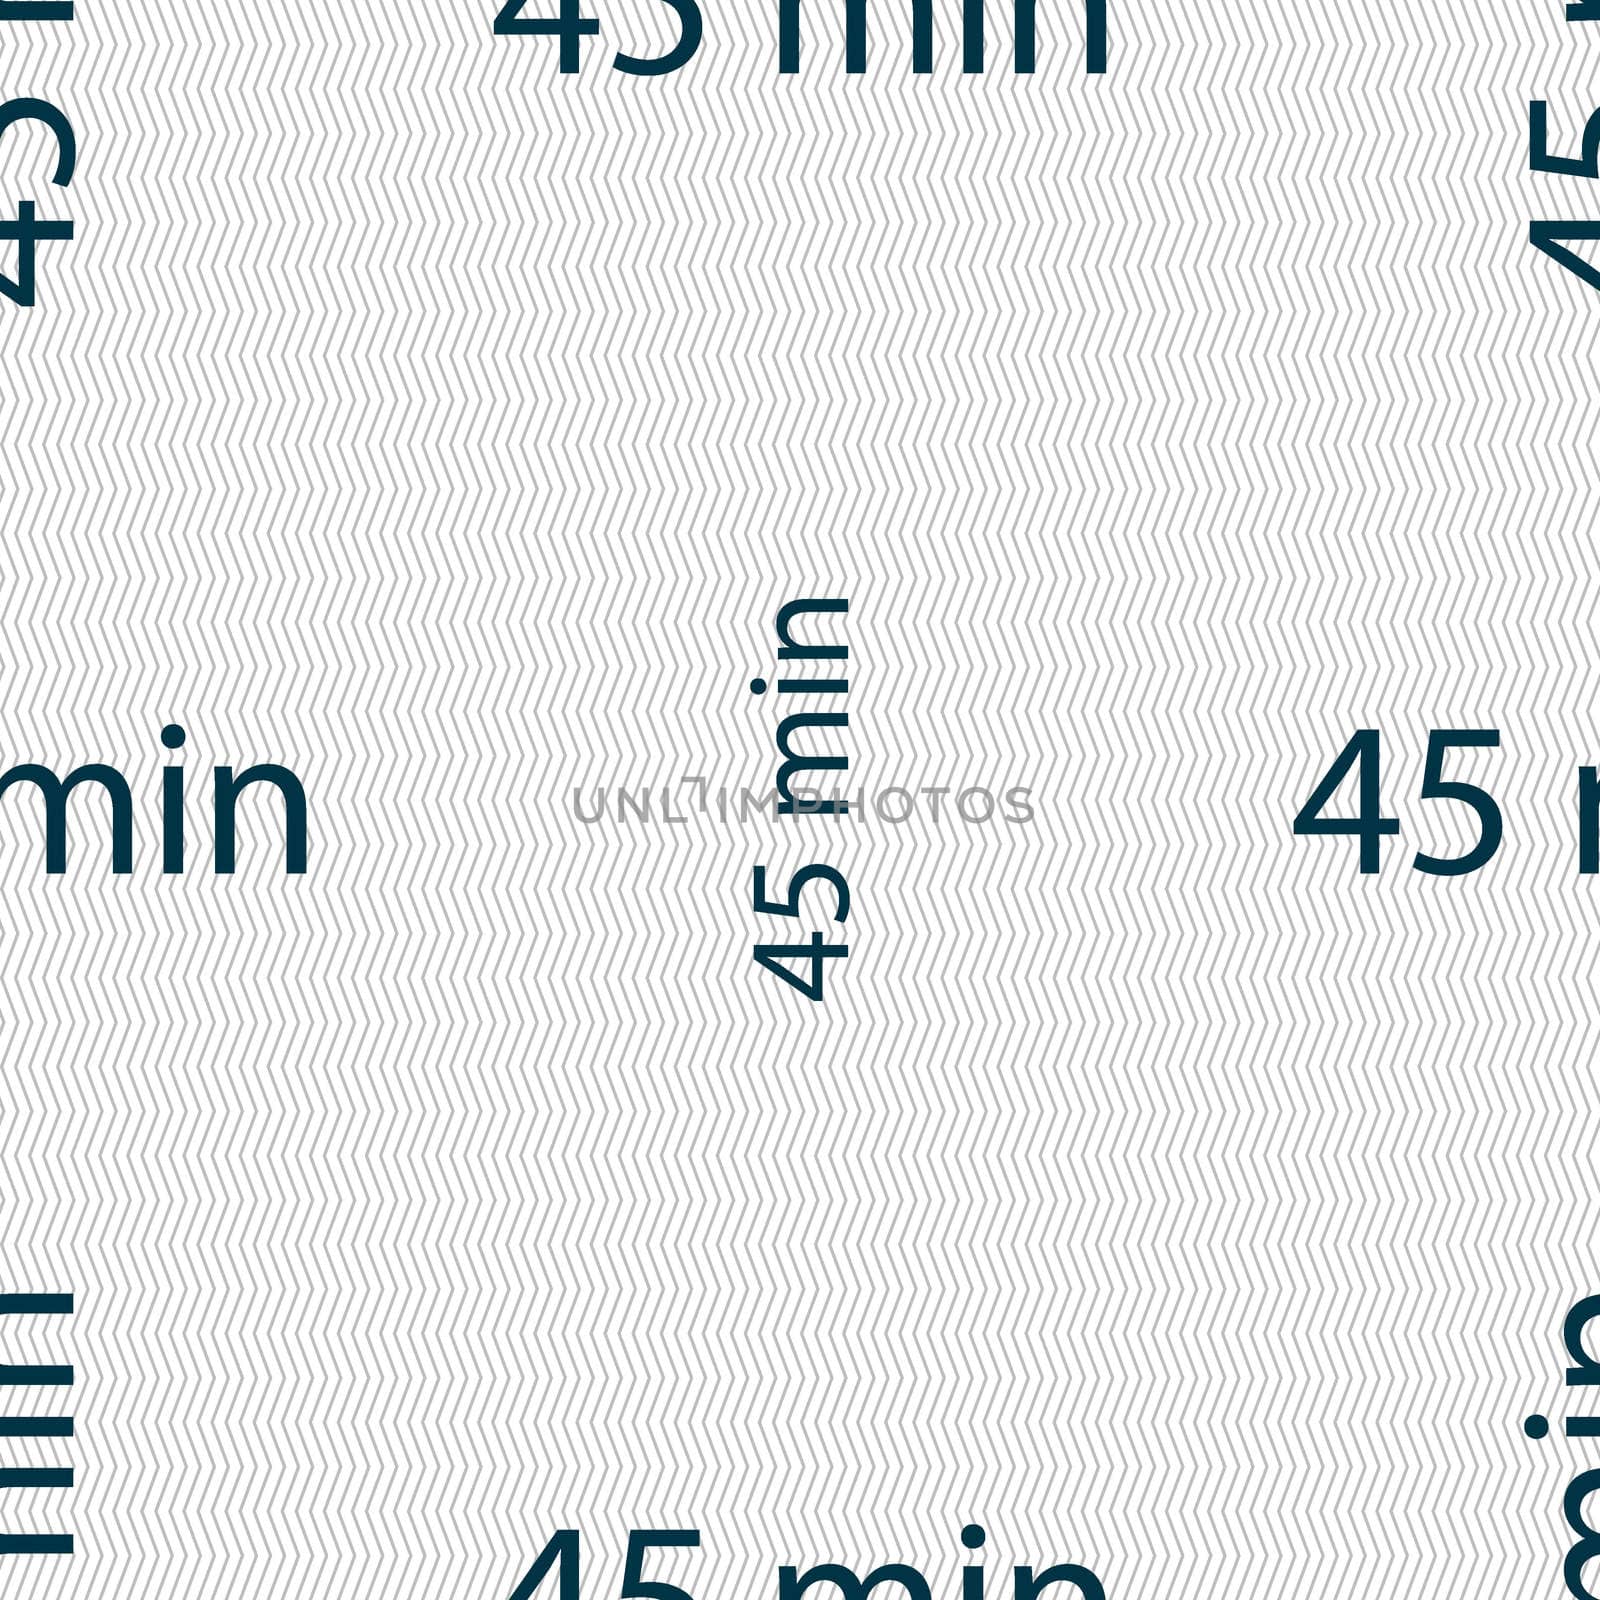 45 minutes sign icon. Seamless abstract background with geometric shapes. illustration